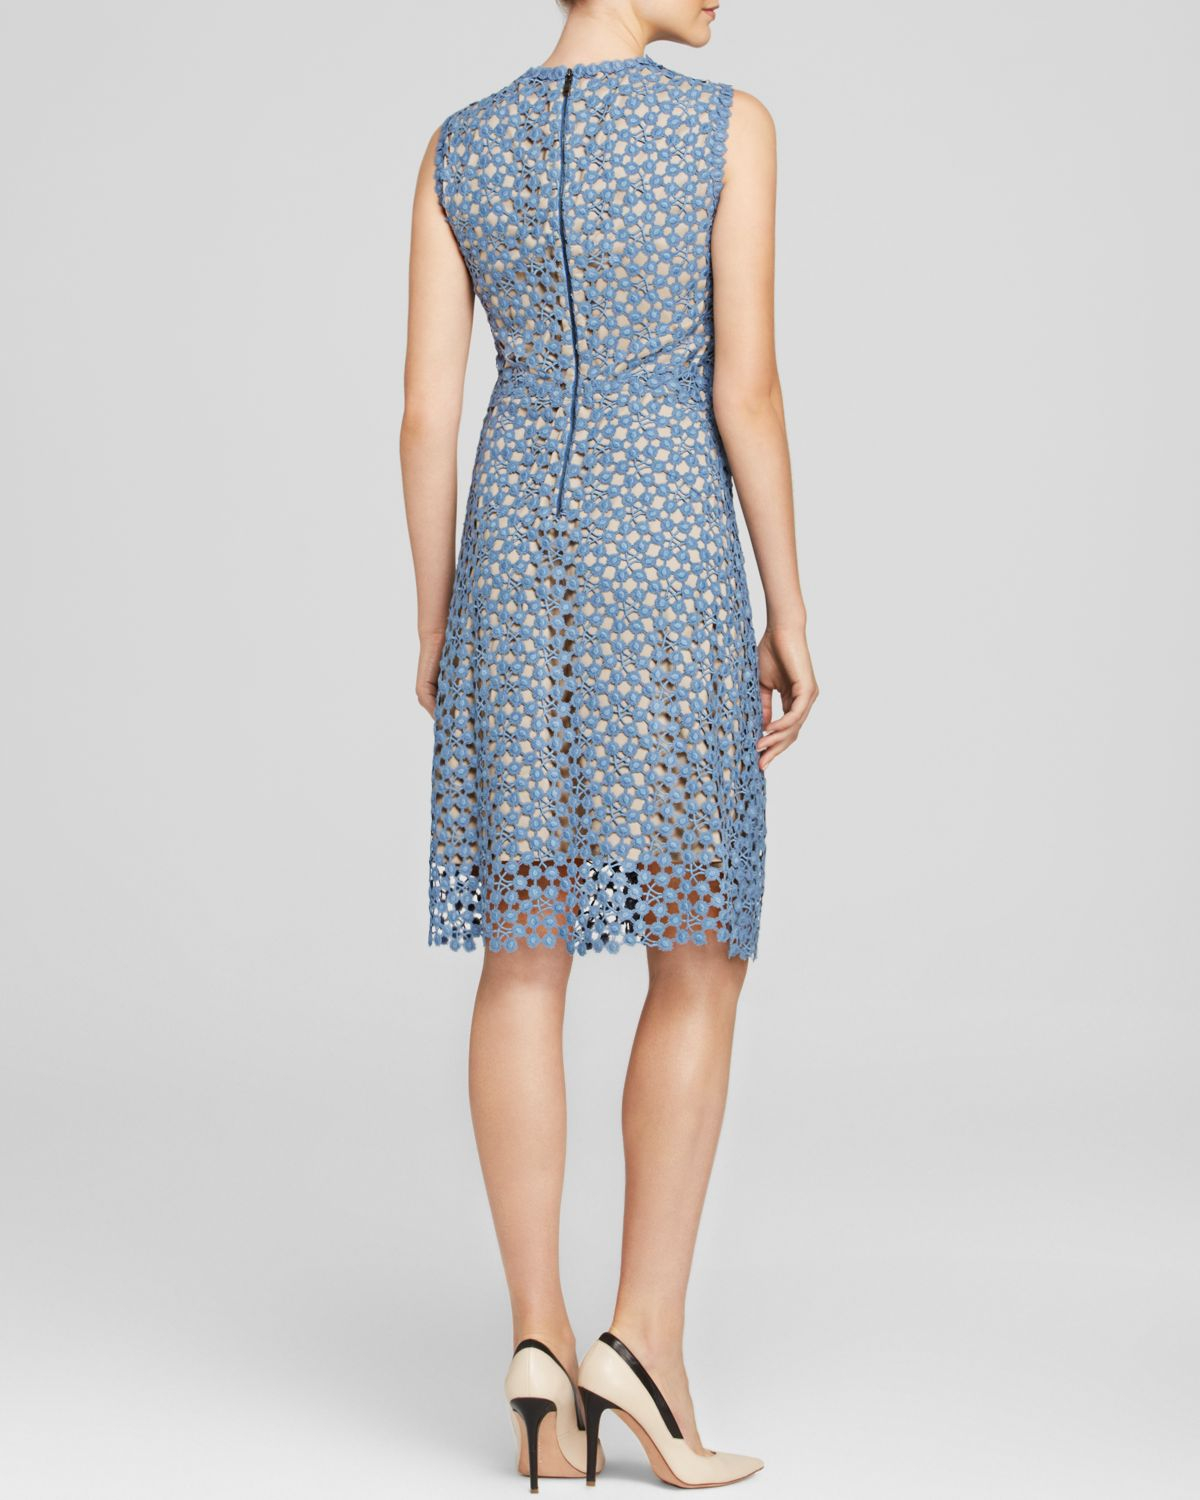 Lyst - Elie Tahari Ophelia Floral Lace Dress in Blue